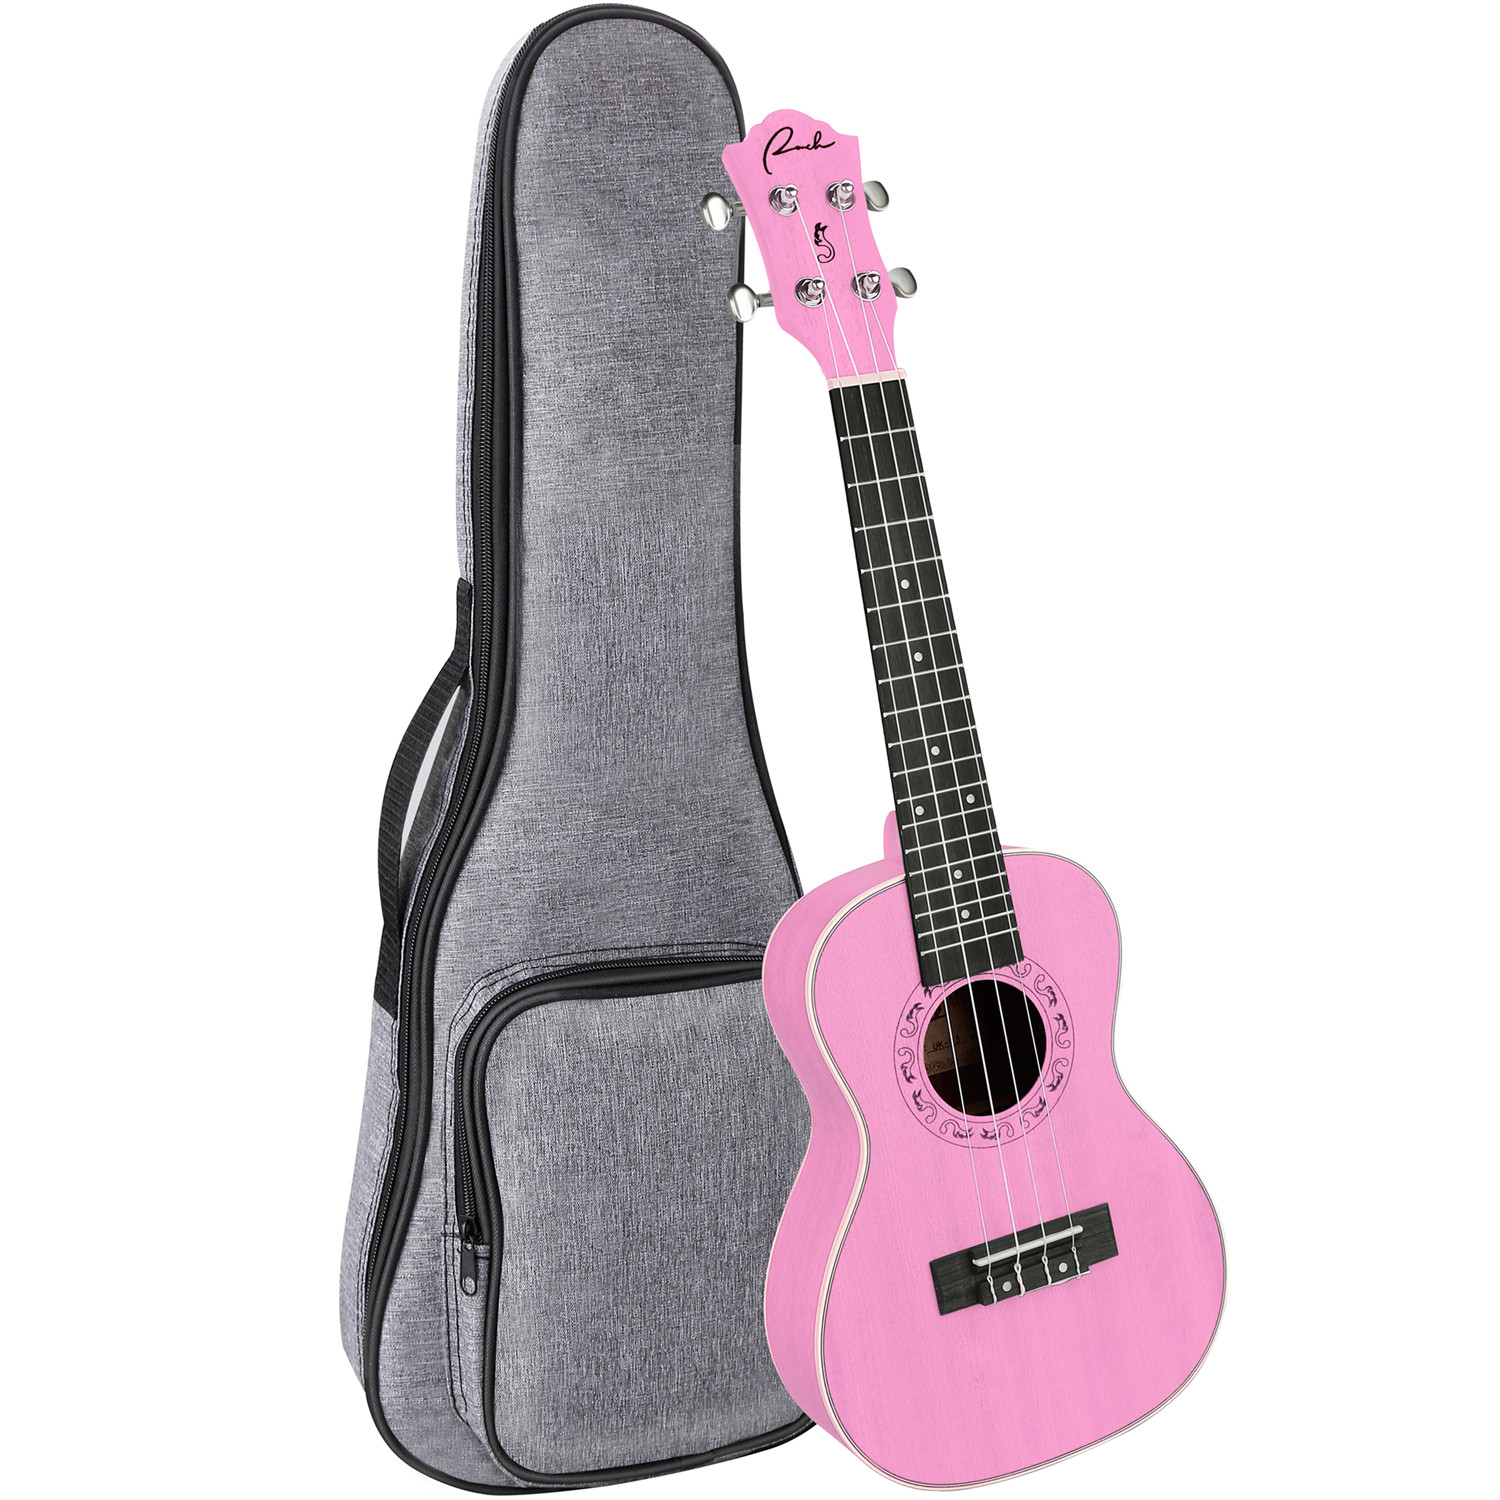 Small Hawaiian Guitar Rose Pink Concert Ukulele Ranch 23 inch Professional Wooden ukelele Instrument with Free Online 12 Lessons and Gig Bag 